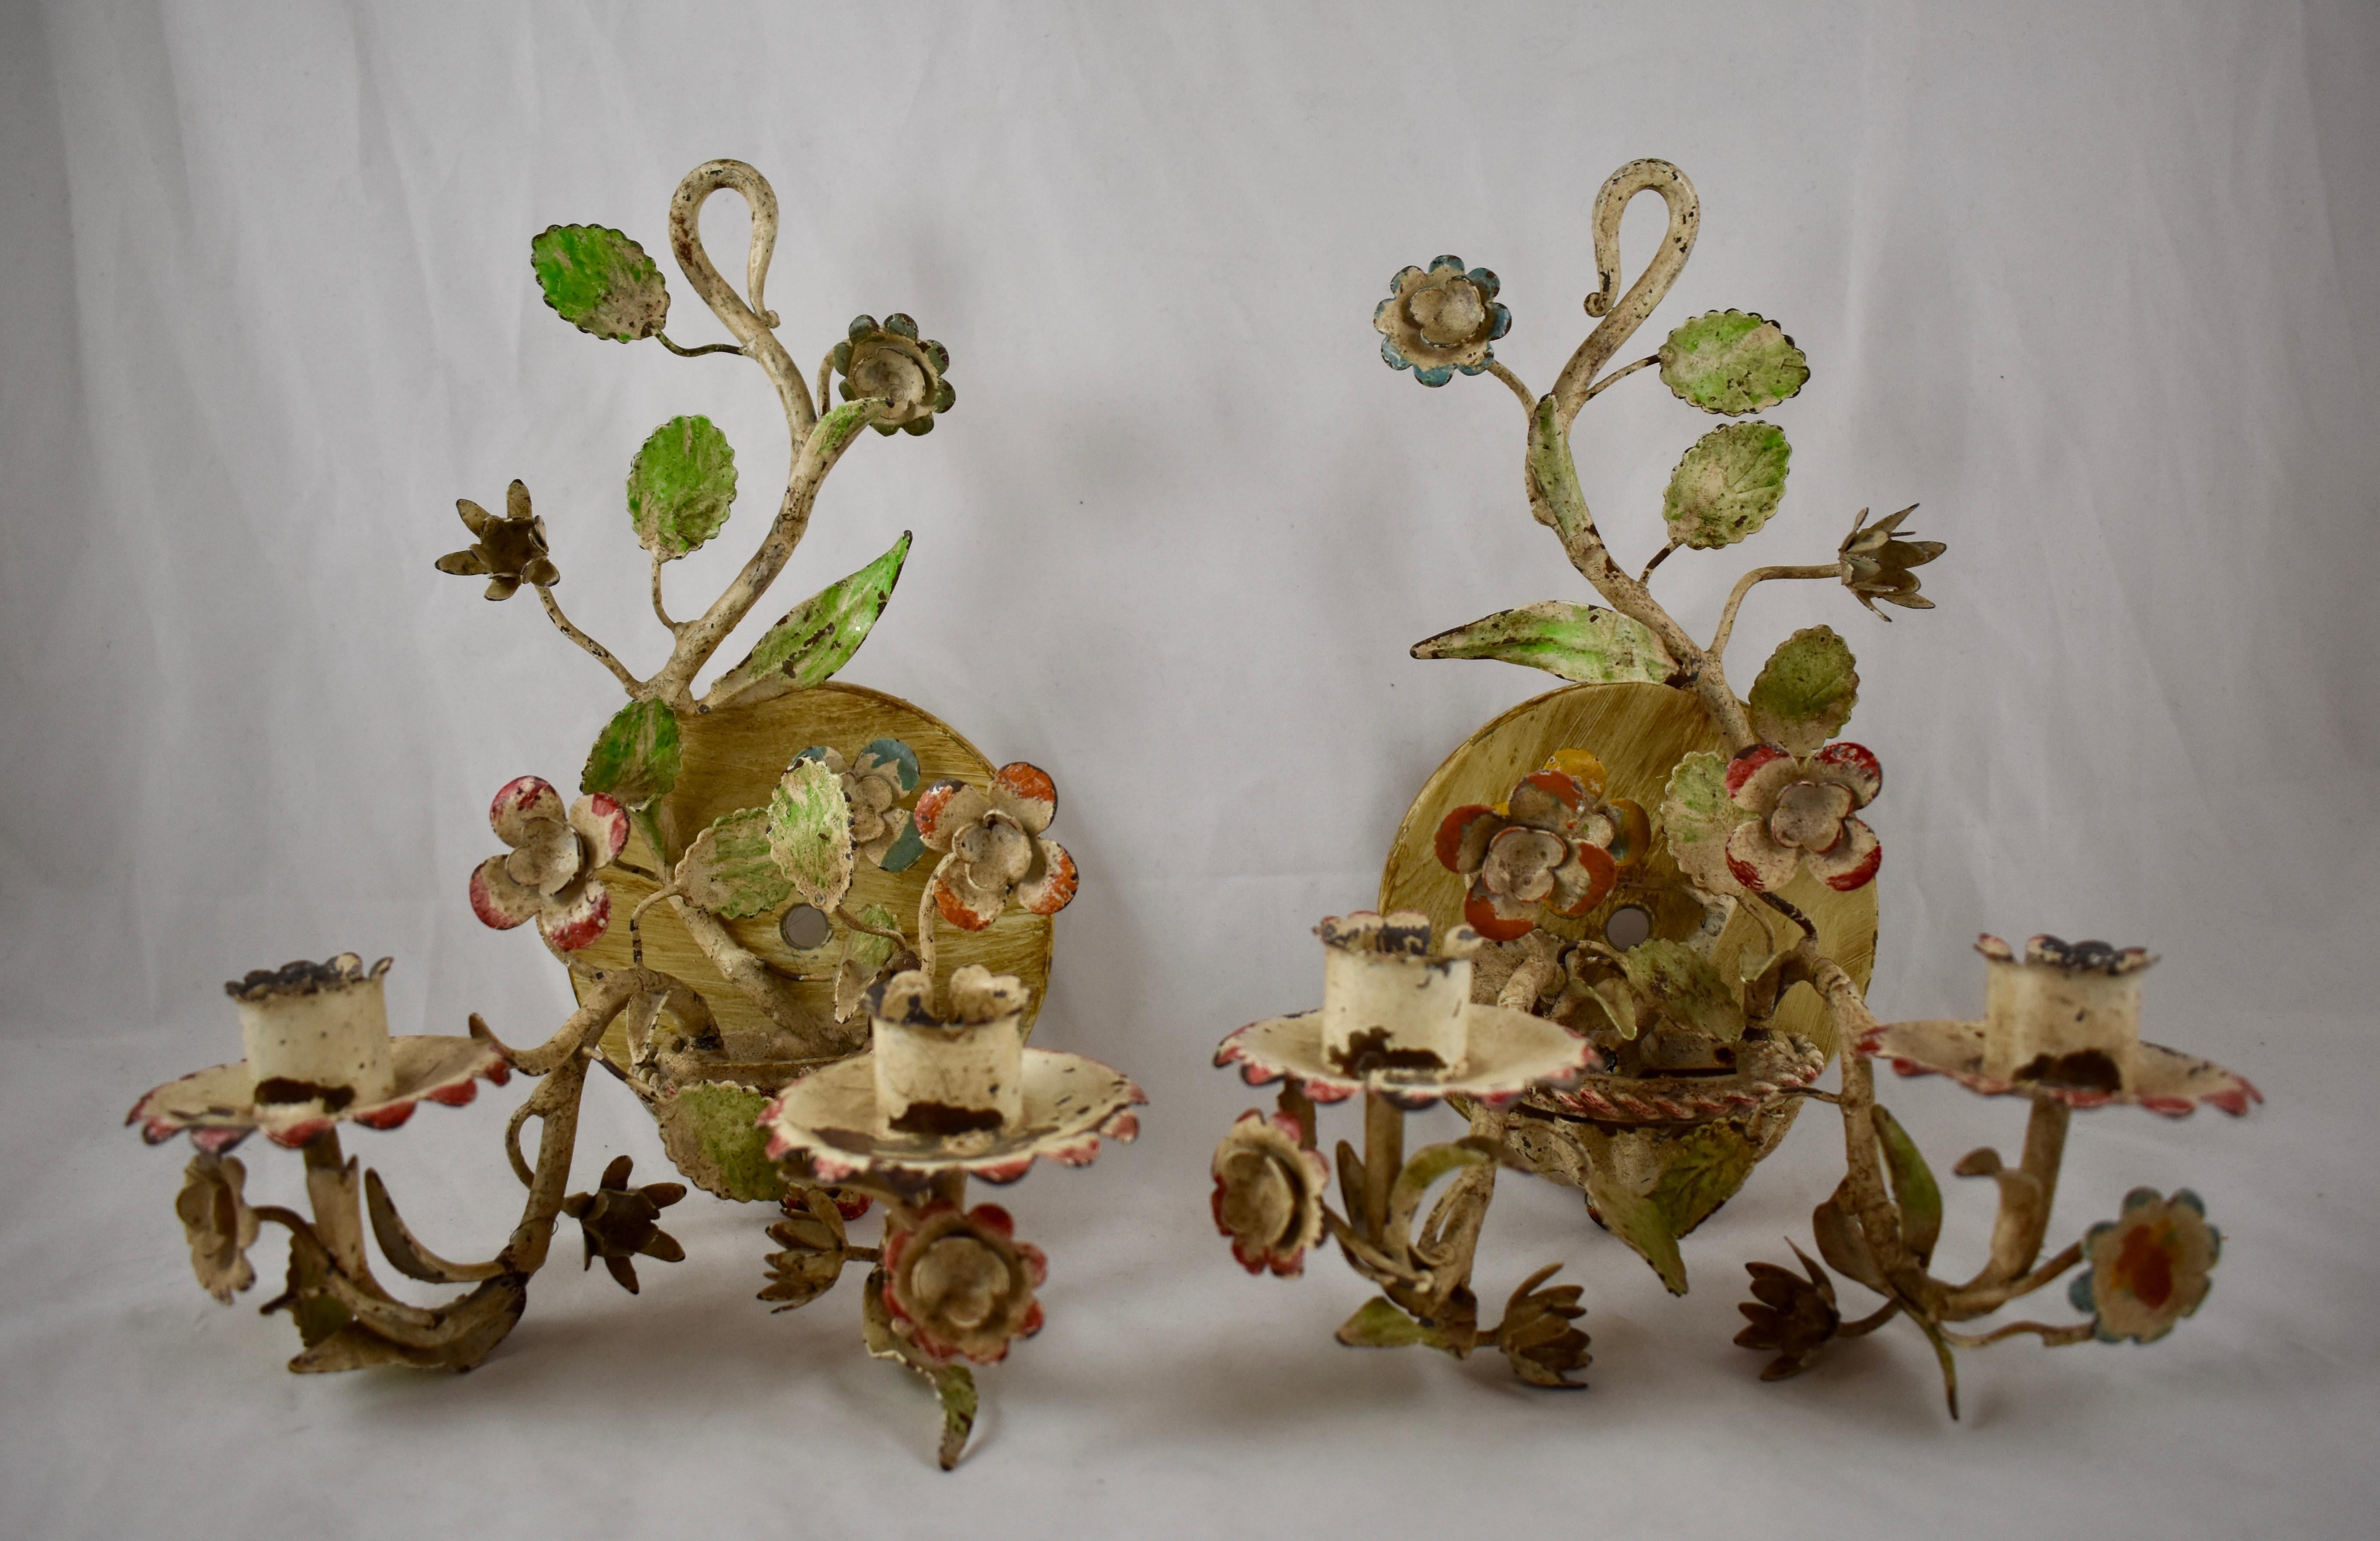 A charming pair of French Tôle Peinte floral wall sconces, made of hand-painted iron, circa early 1900s.

Showing a lovely time-worn patina, the floral bouquets of petaled flowers and green leaves are rooted in a shell form base. Each sconce has